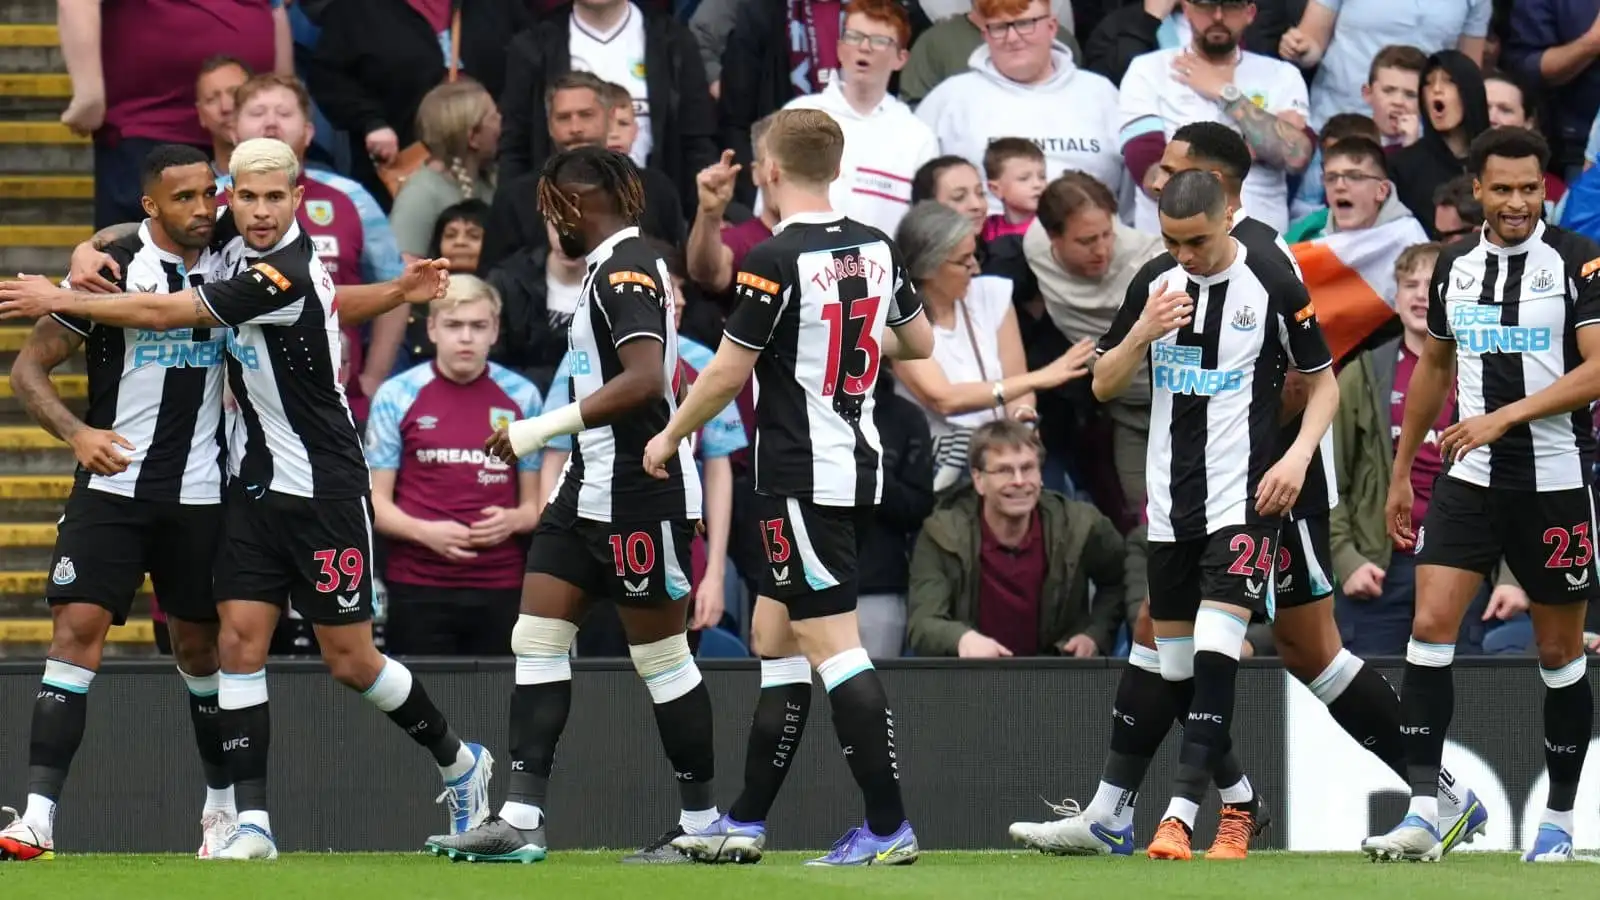 Cornet strike not enough as Wilson double sees Burnley relegated after Newcastle defeat